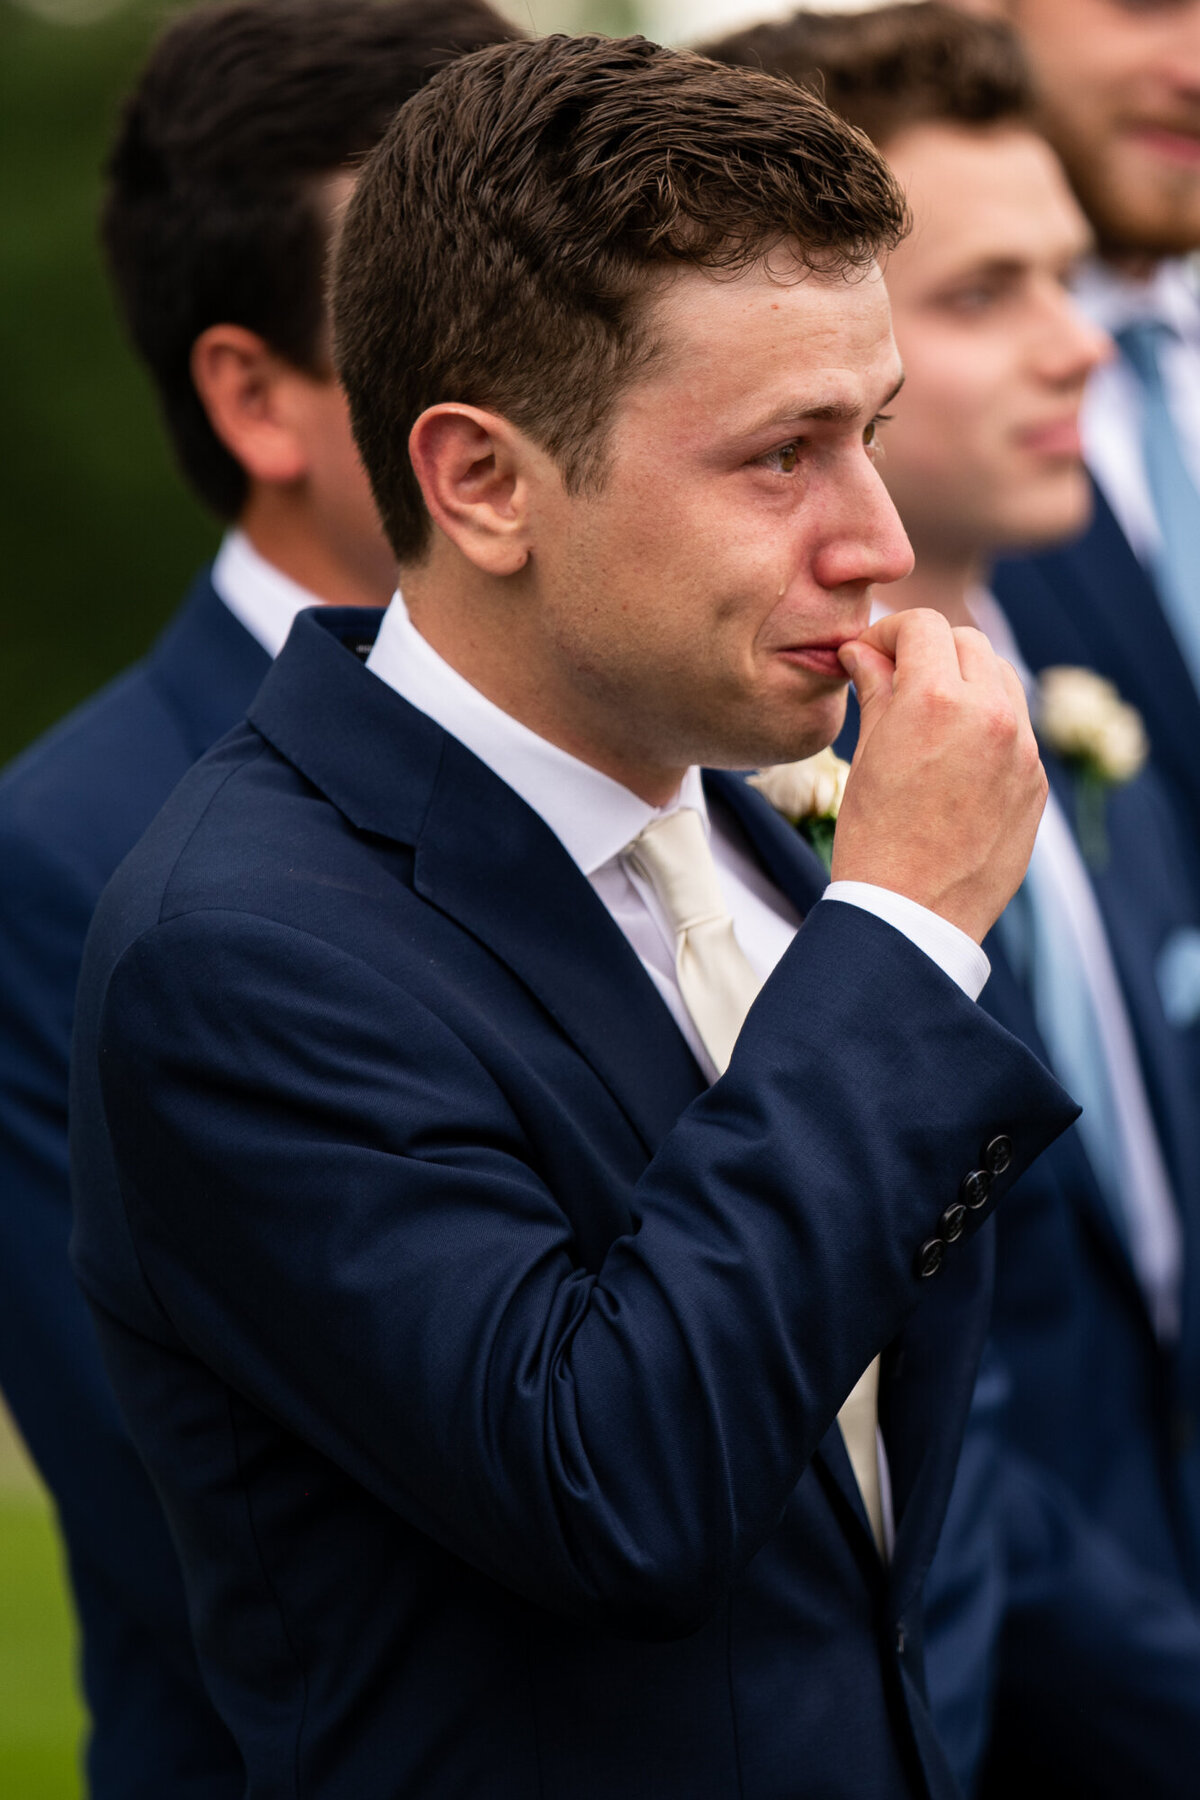 Groom sees his bride walking up the aisle and sheds tears of joy